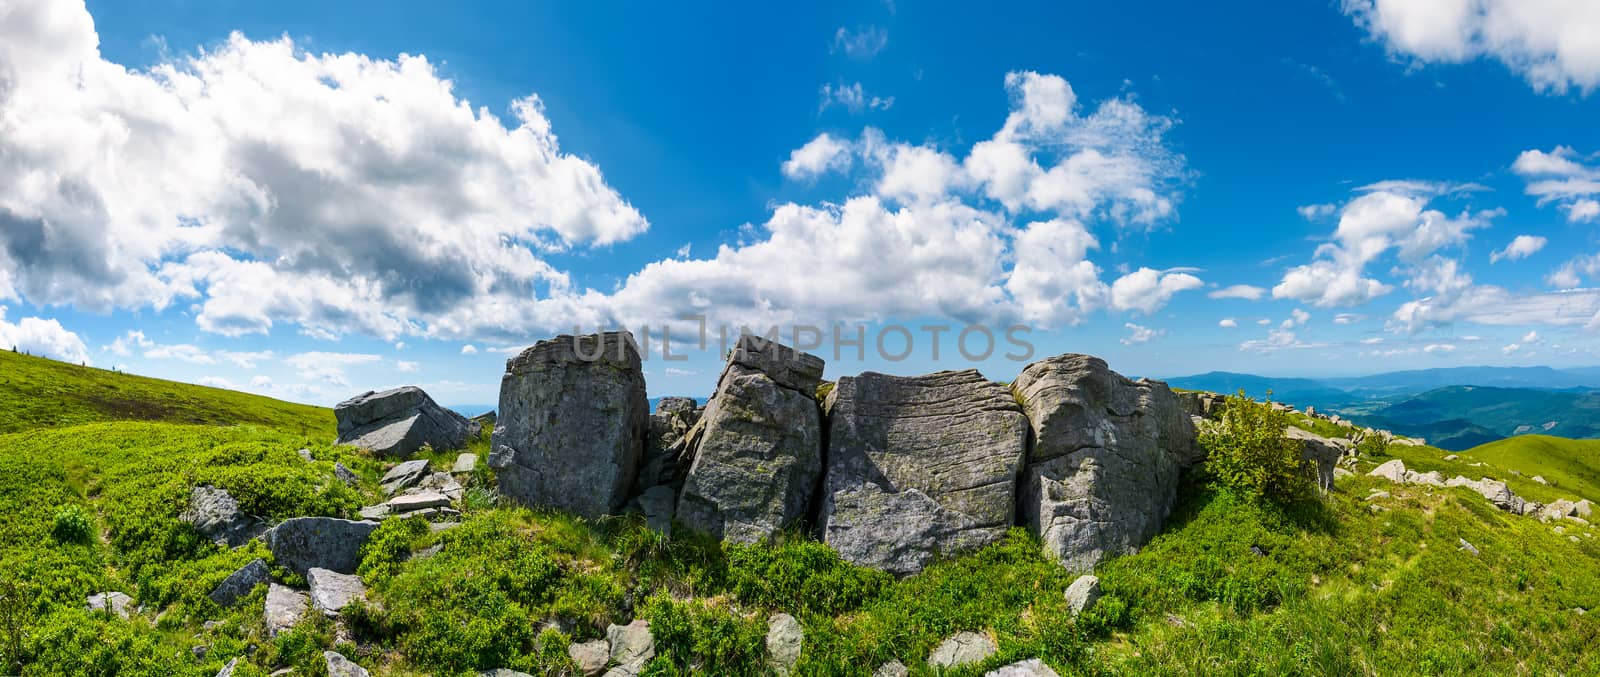 mountainous panorama with boulders on hillside by Pellinni